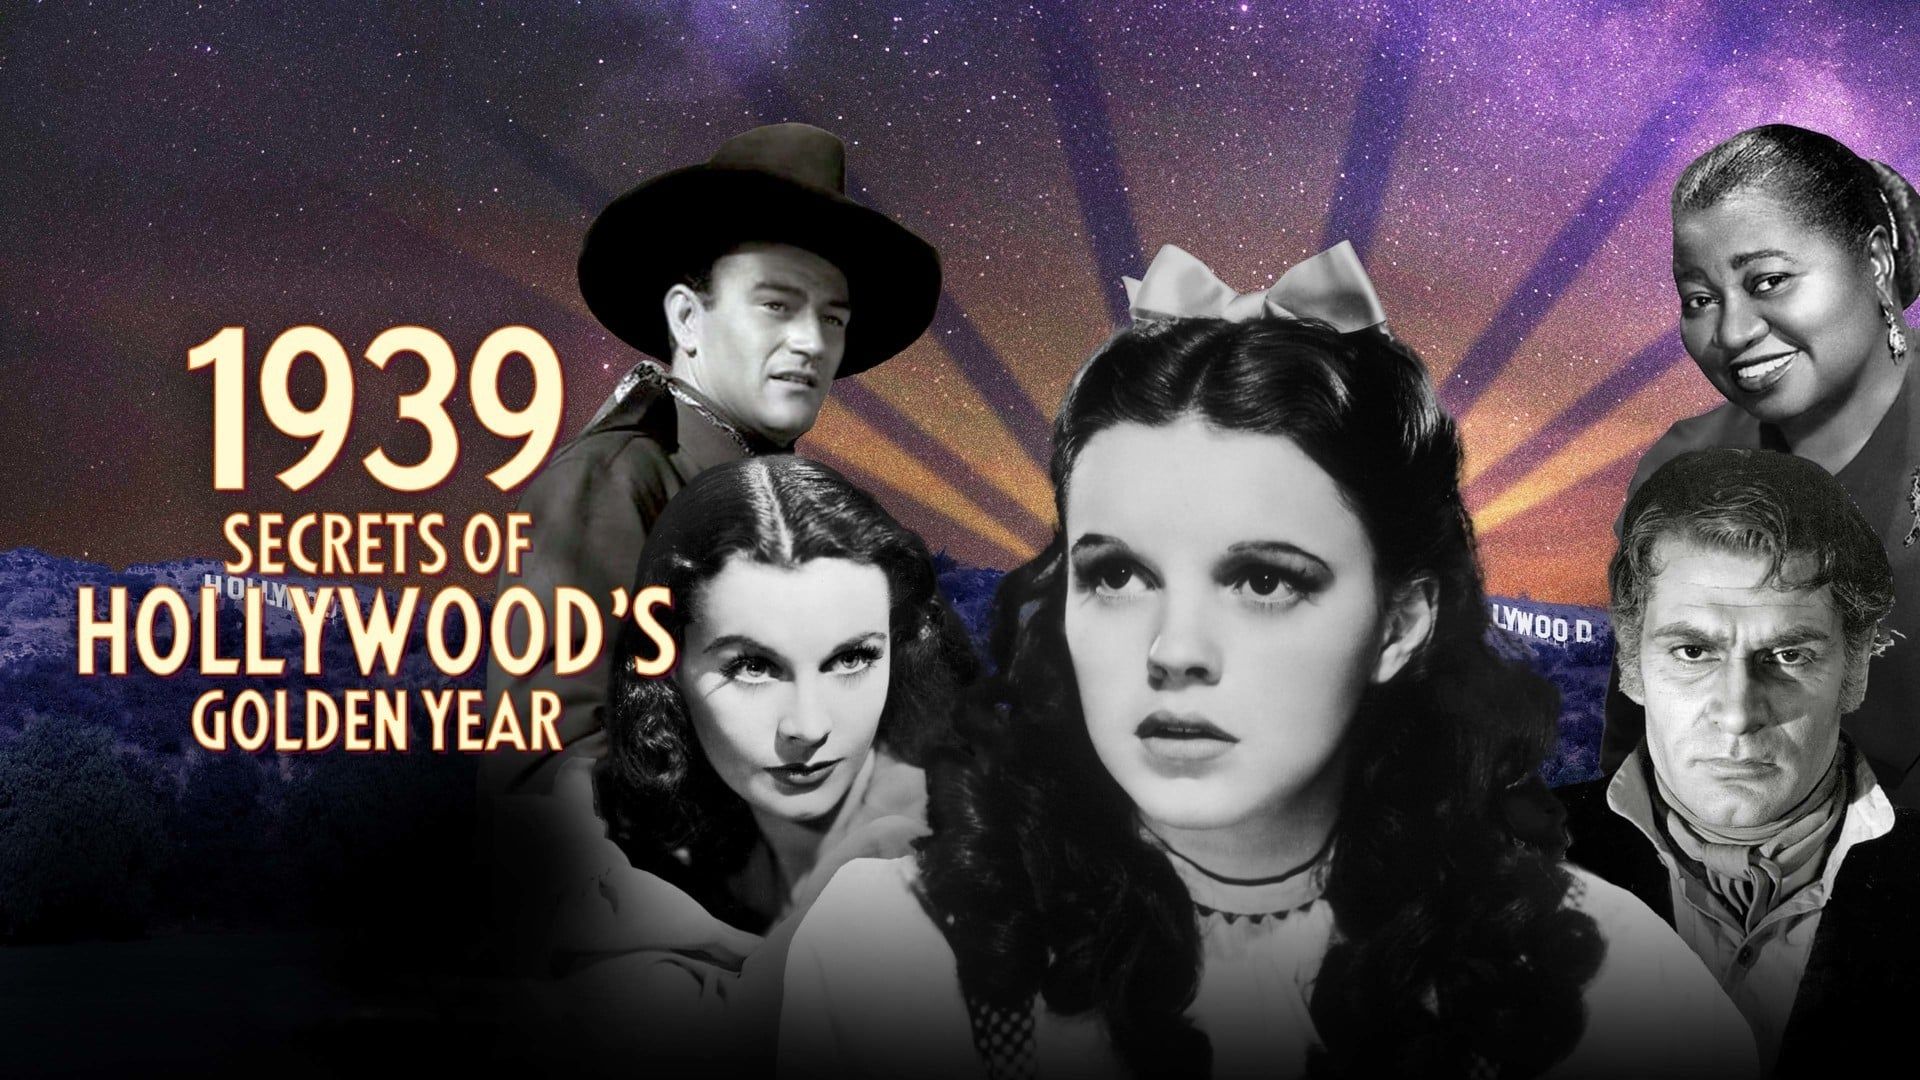 1939: Secrets of Hollywood's Golden Year background